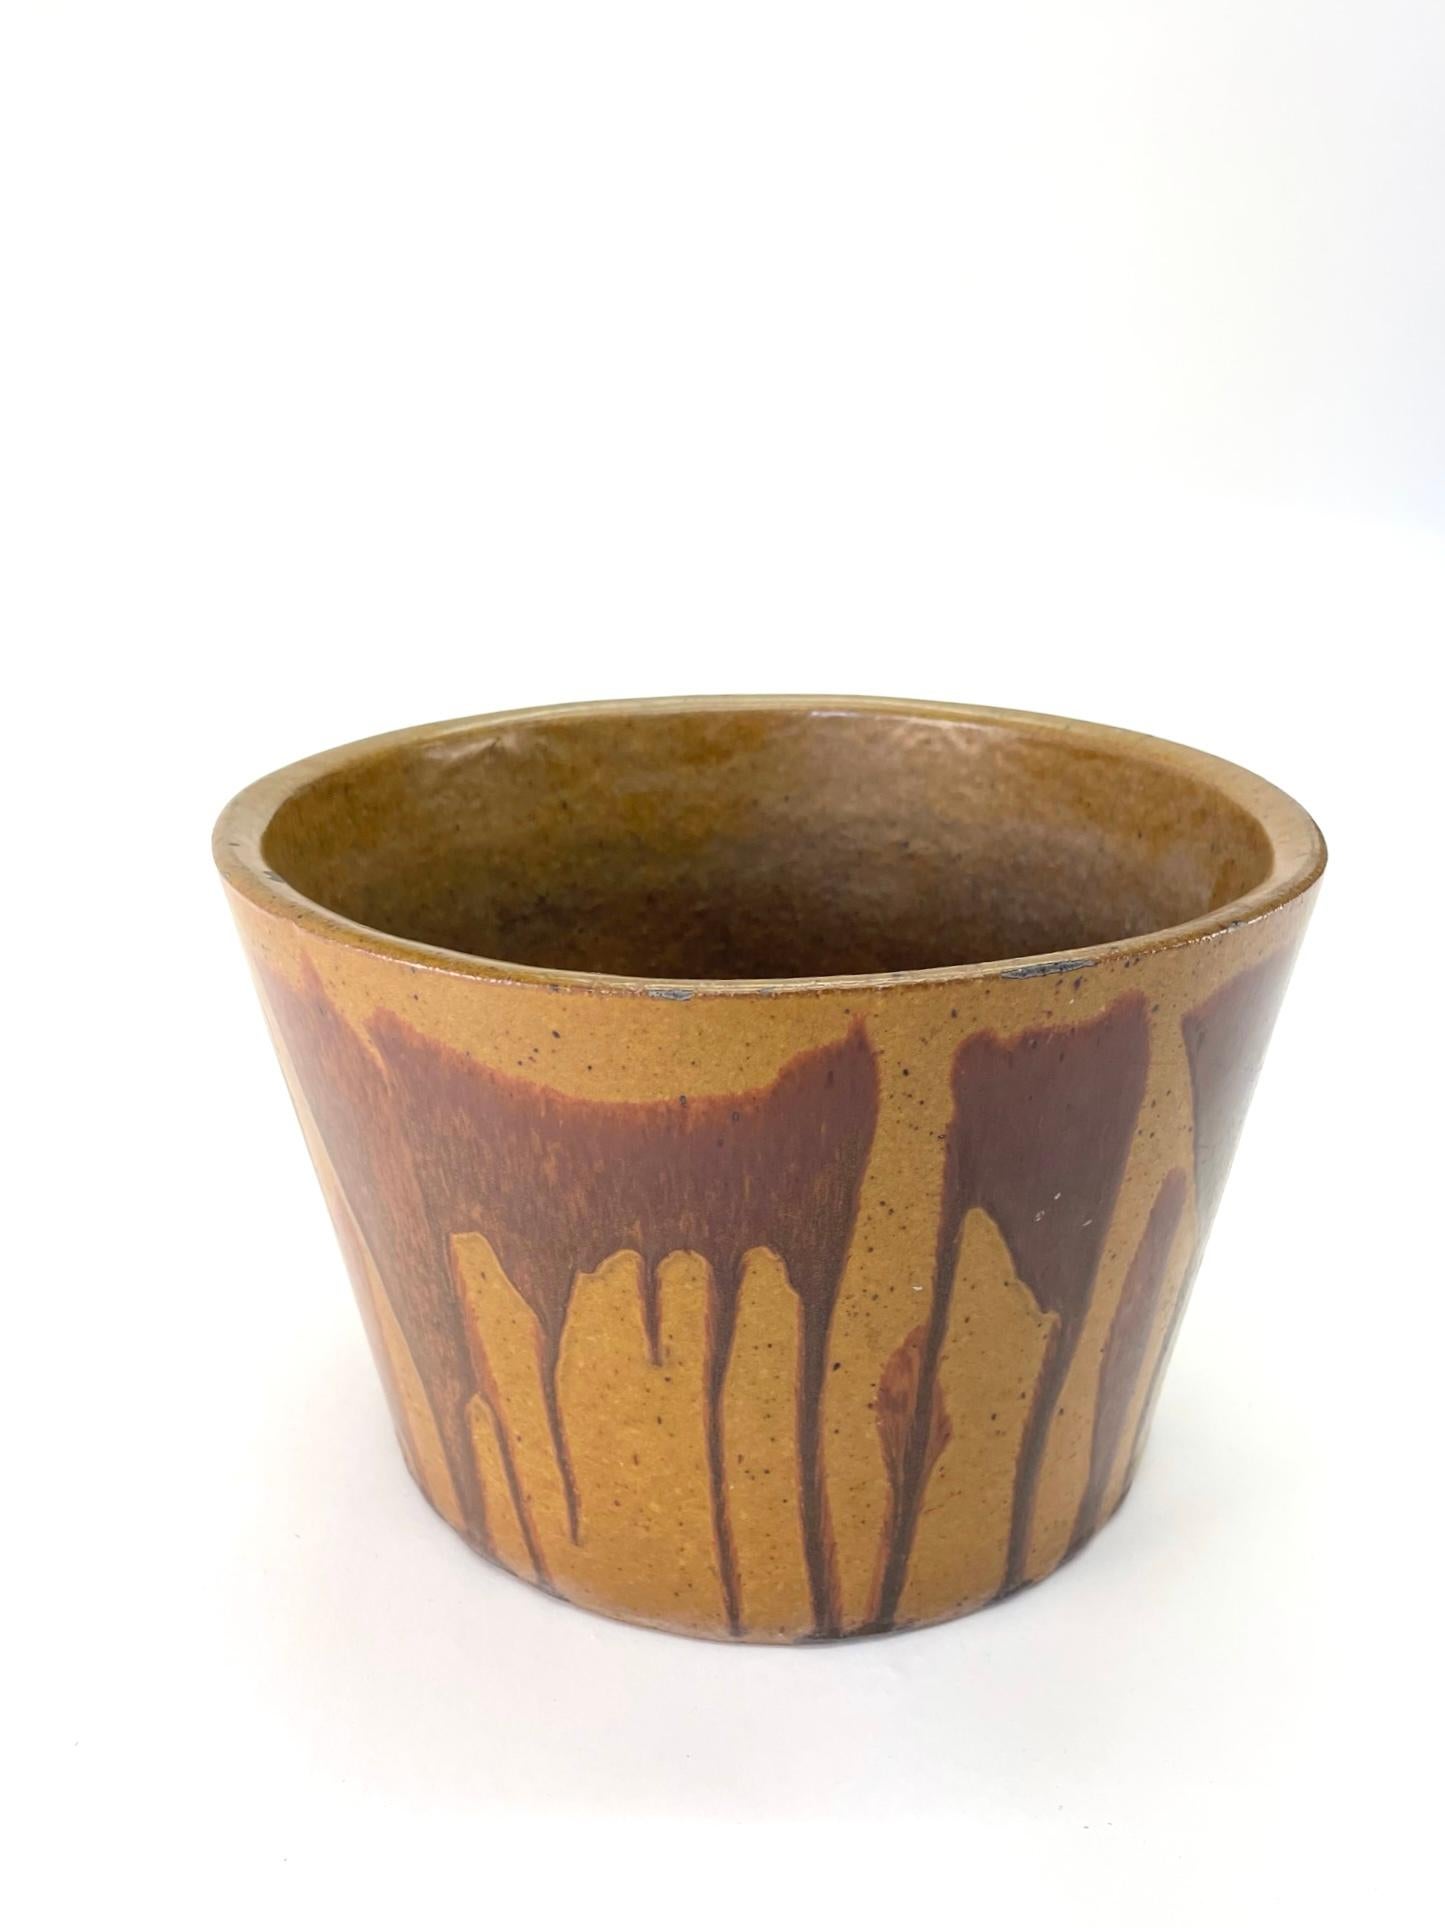 American David Cressey, Flame Glazed Planter, model S-12 by Architectural Pottery